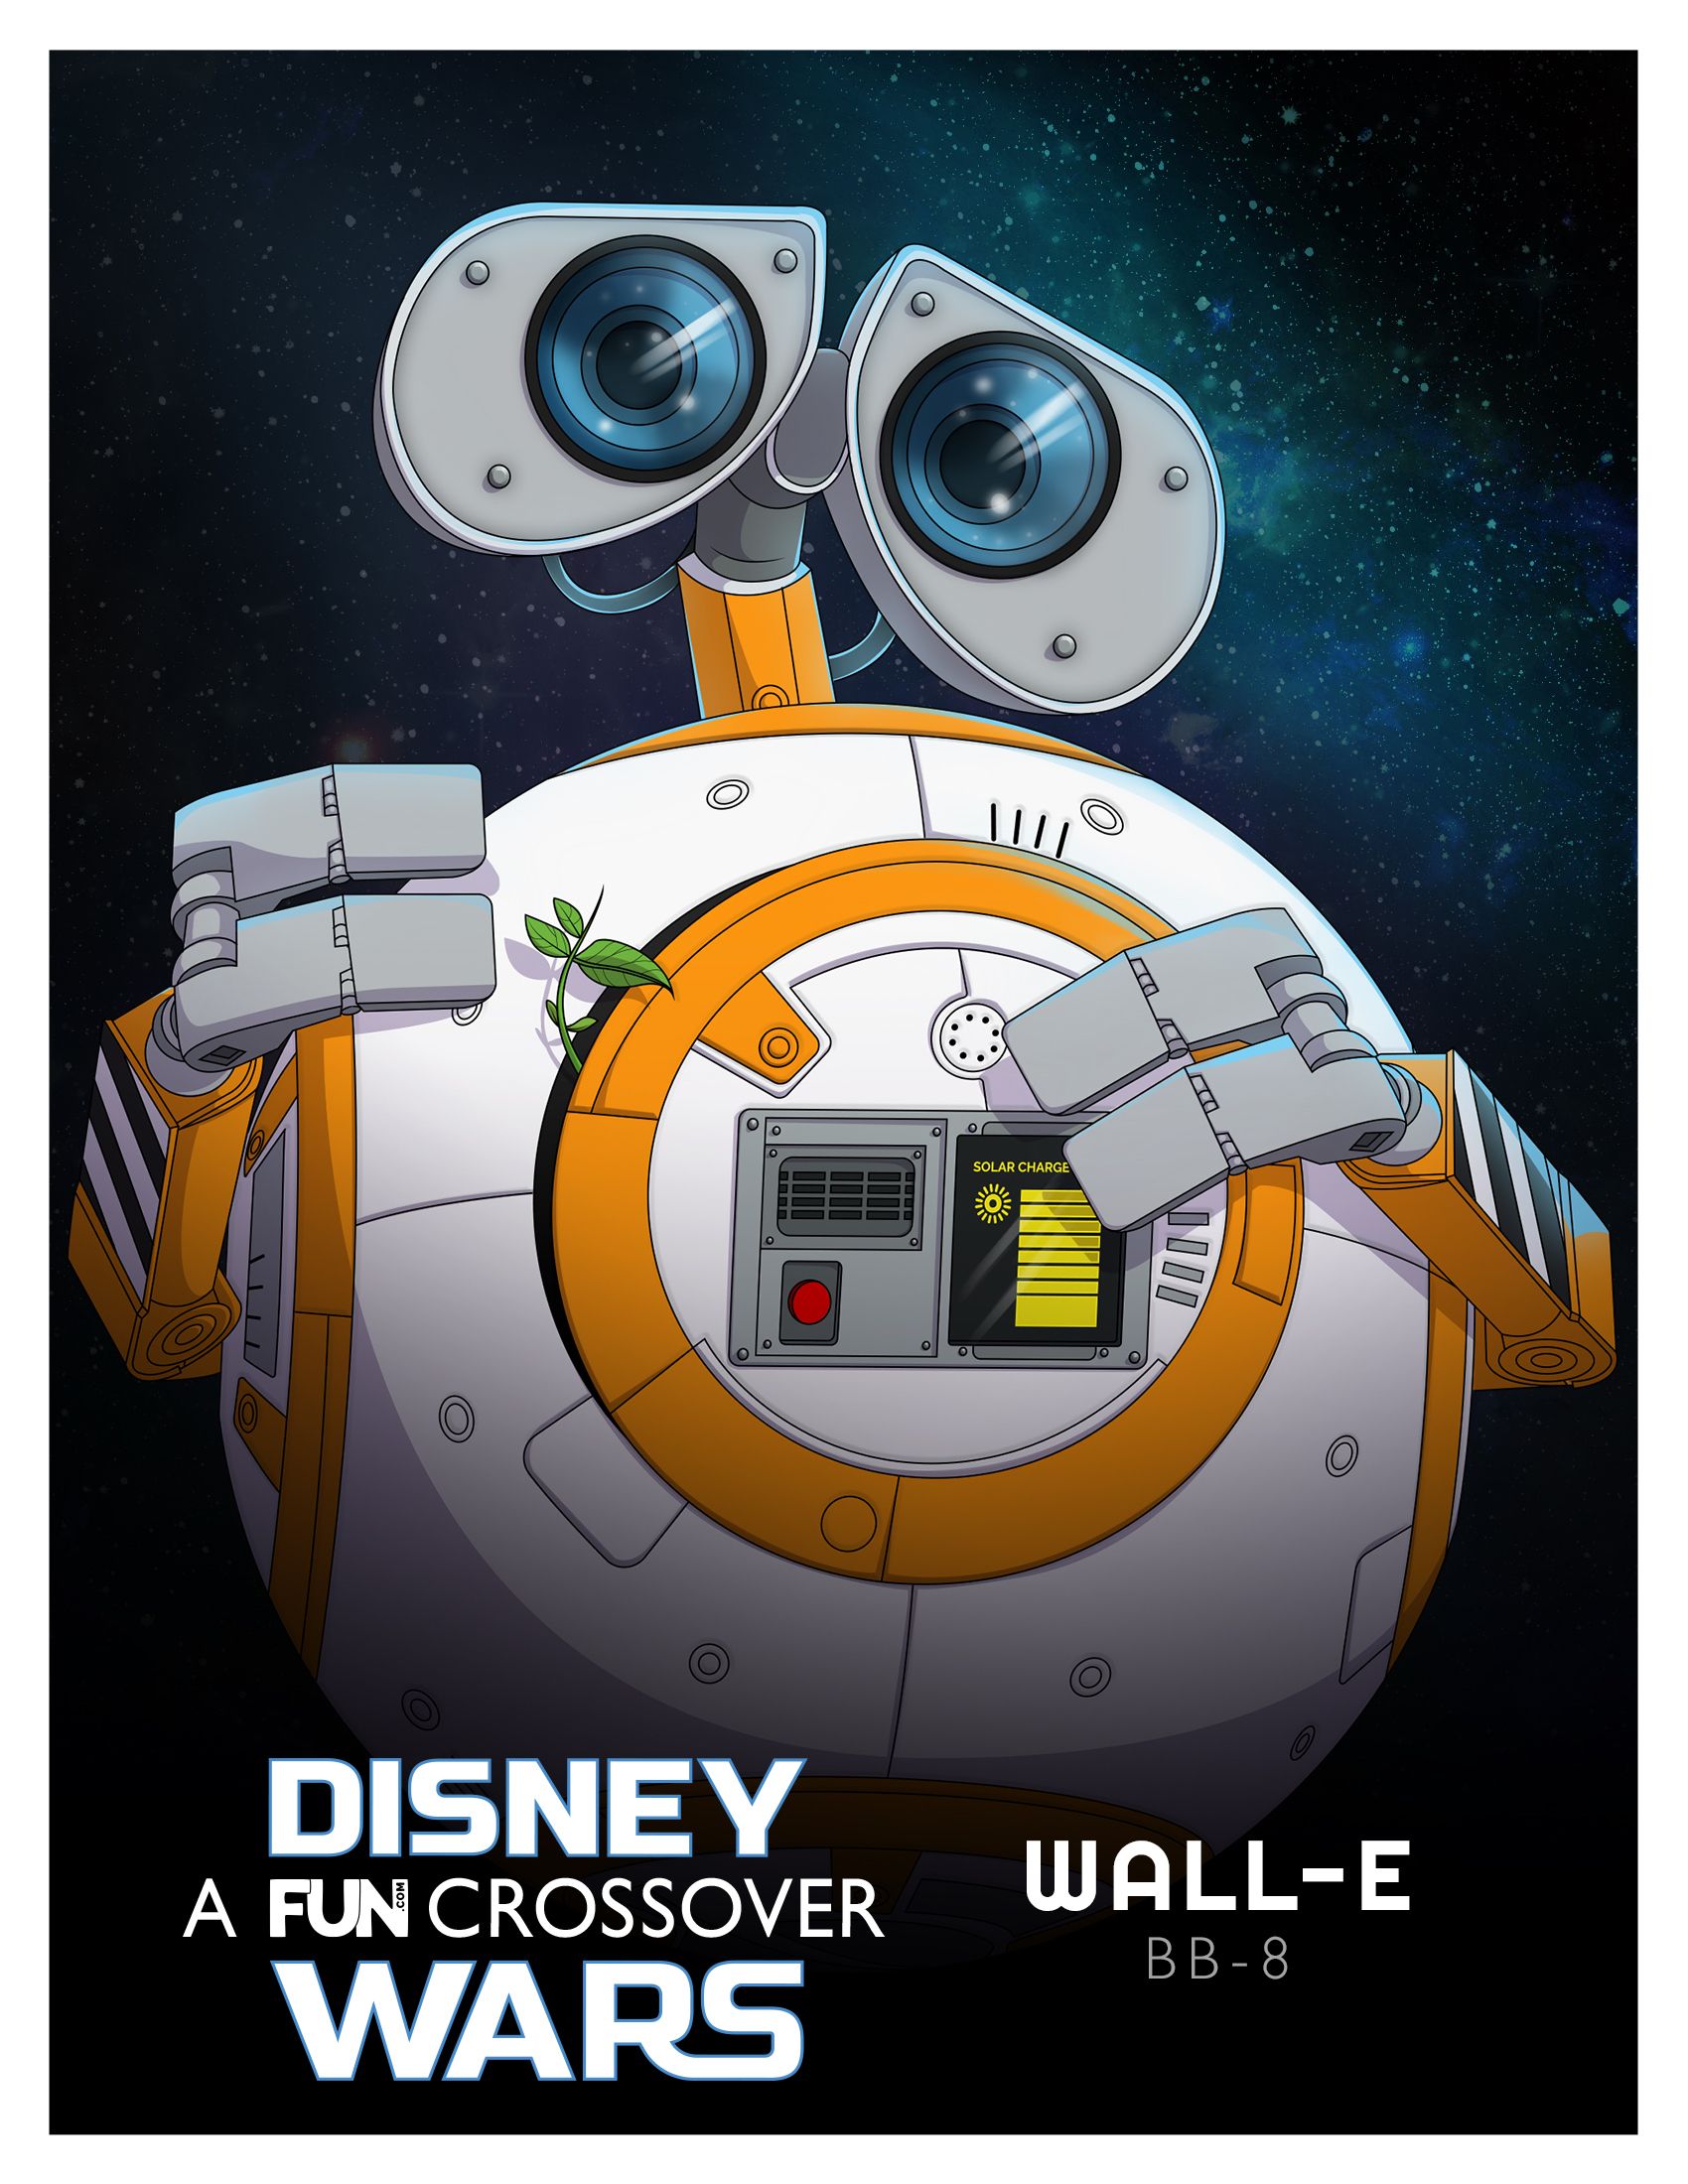 The Rise of Skywalker Disney Crossover Poster #8